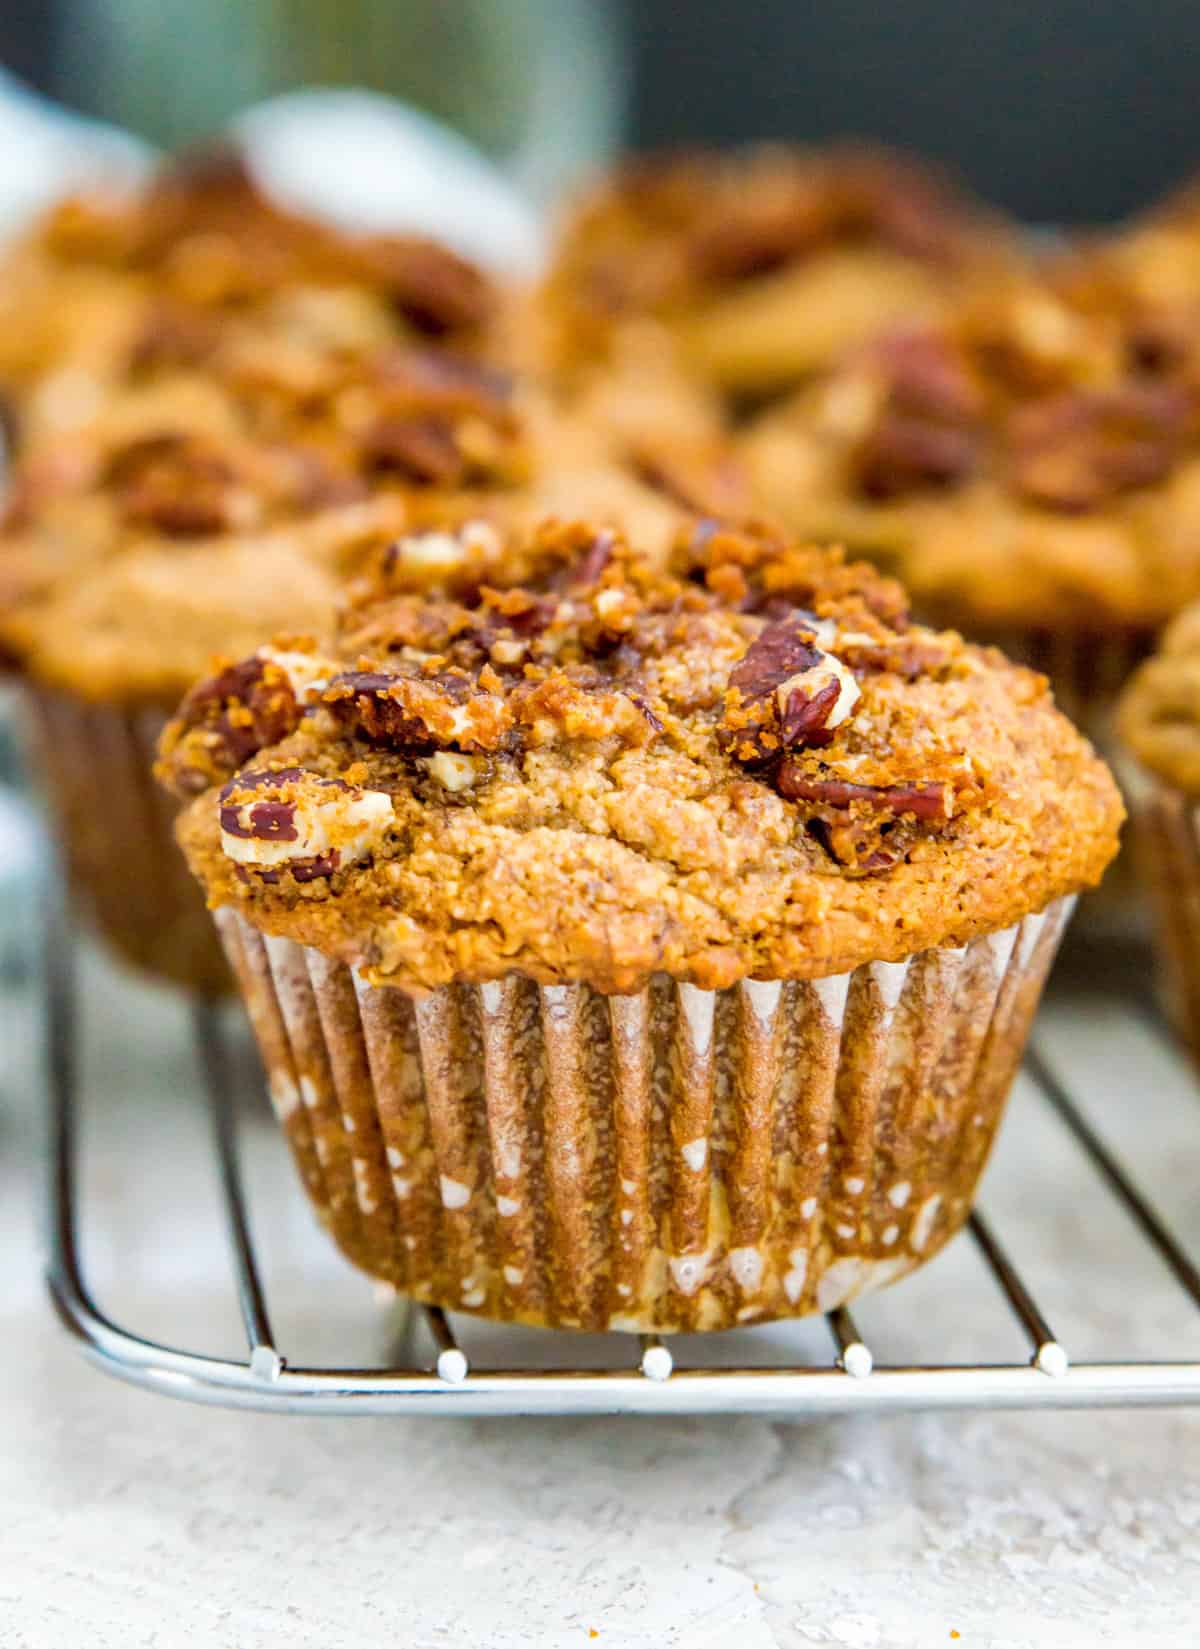 A banana pecan muffin with pecan streusel topping on a baking rack.